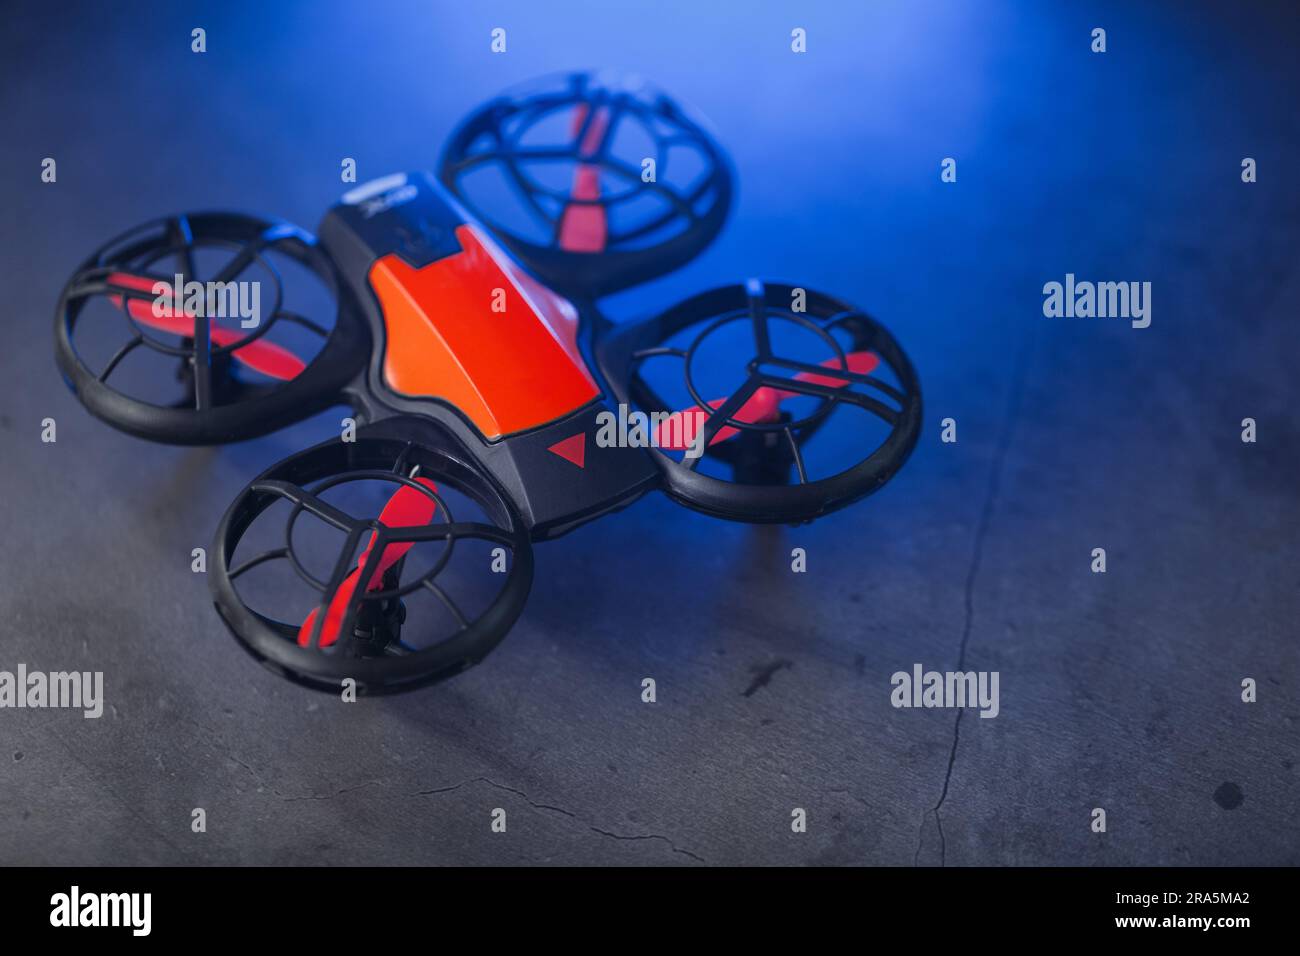 Orange quadcopter mini spy drone on a dark background with blue backlight and free space Stock Photo